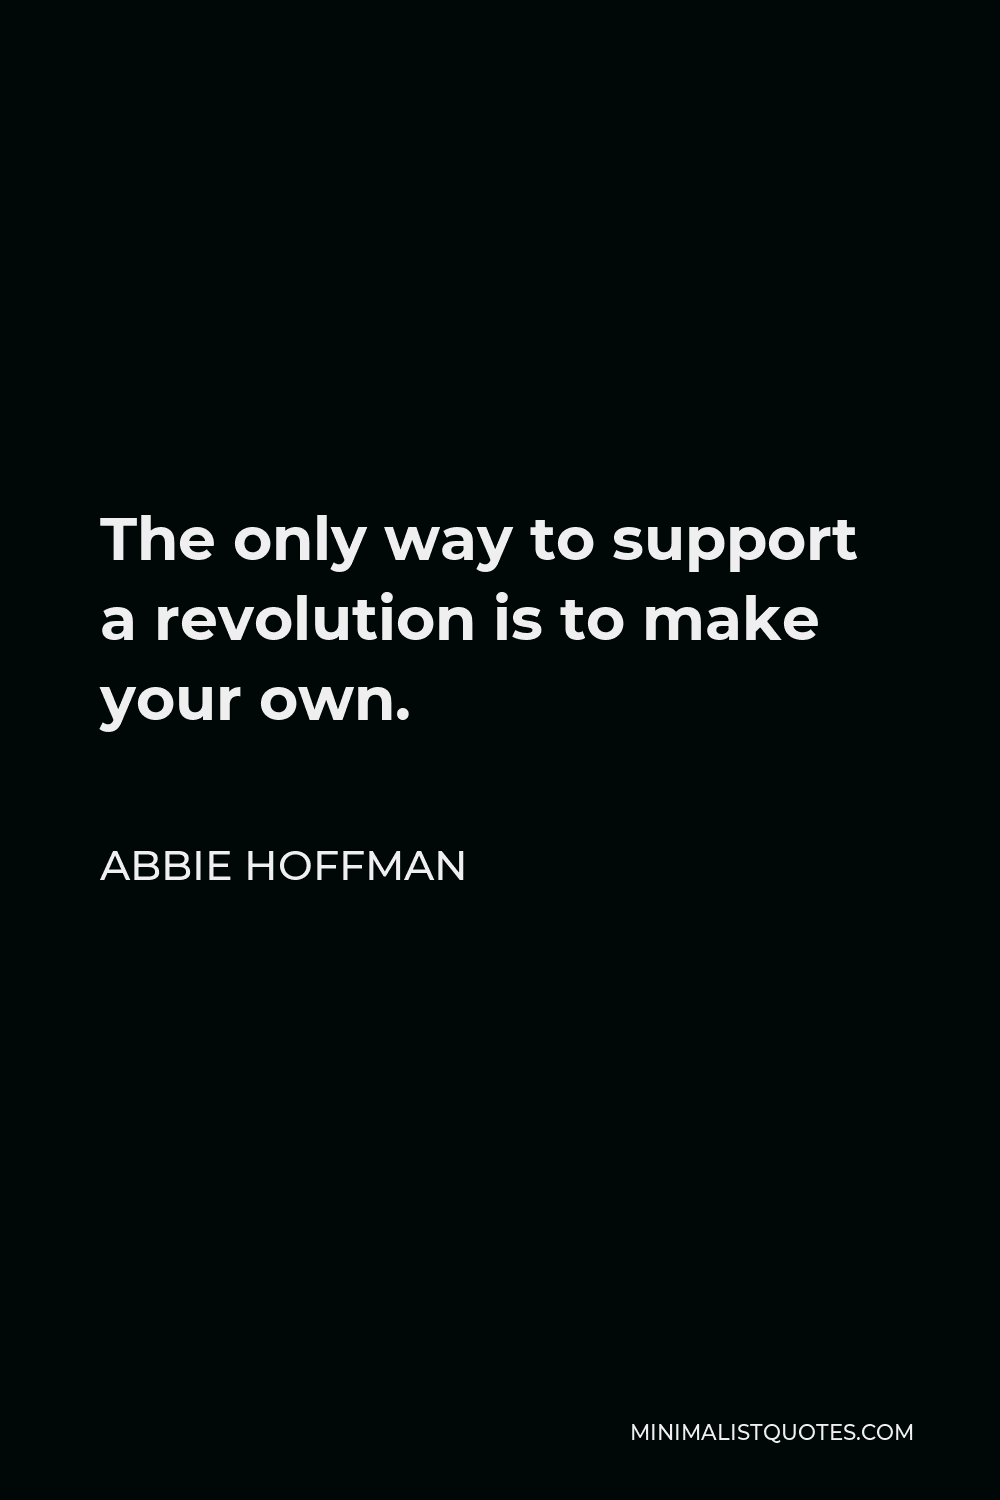 Abbie Hoffman Quote - The only way to support a revolution is to make your own.